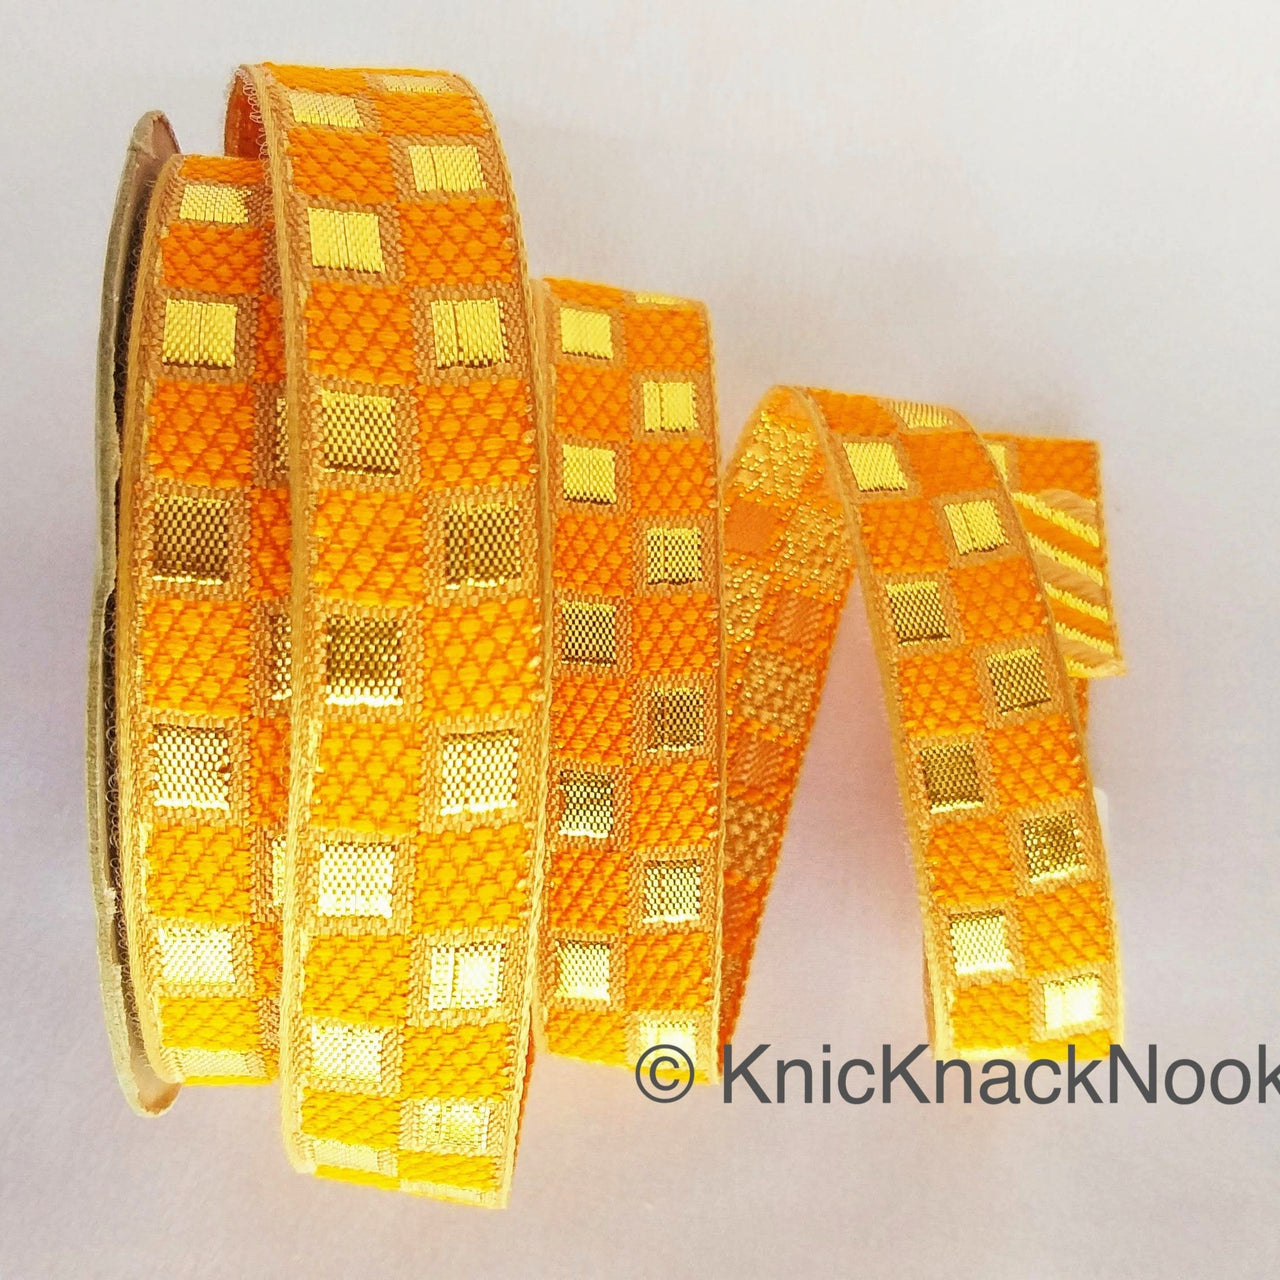 Yellow and Gold Jacquard Weaving Trim, Trim By 2 Yards, Craft Decorative Ribbon